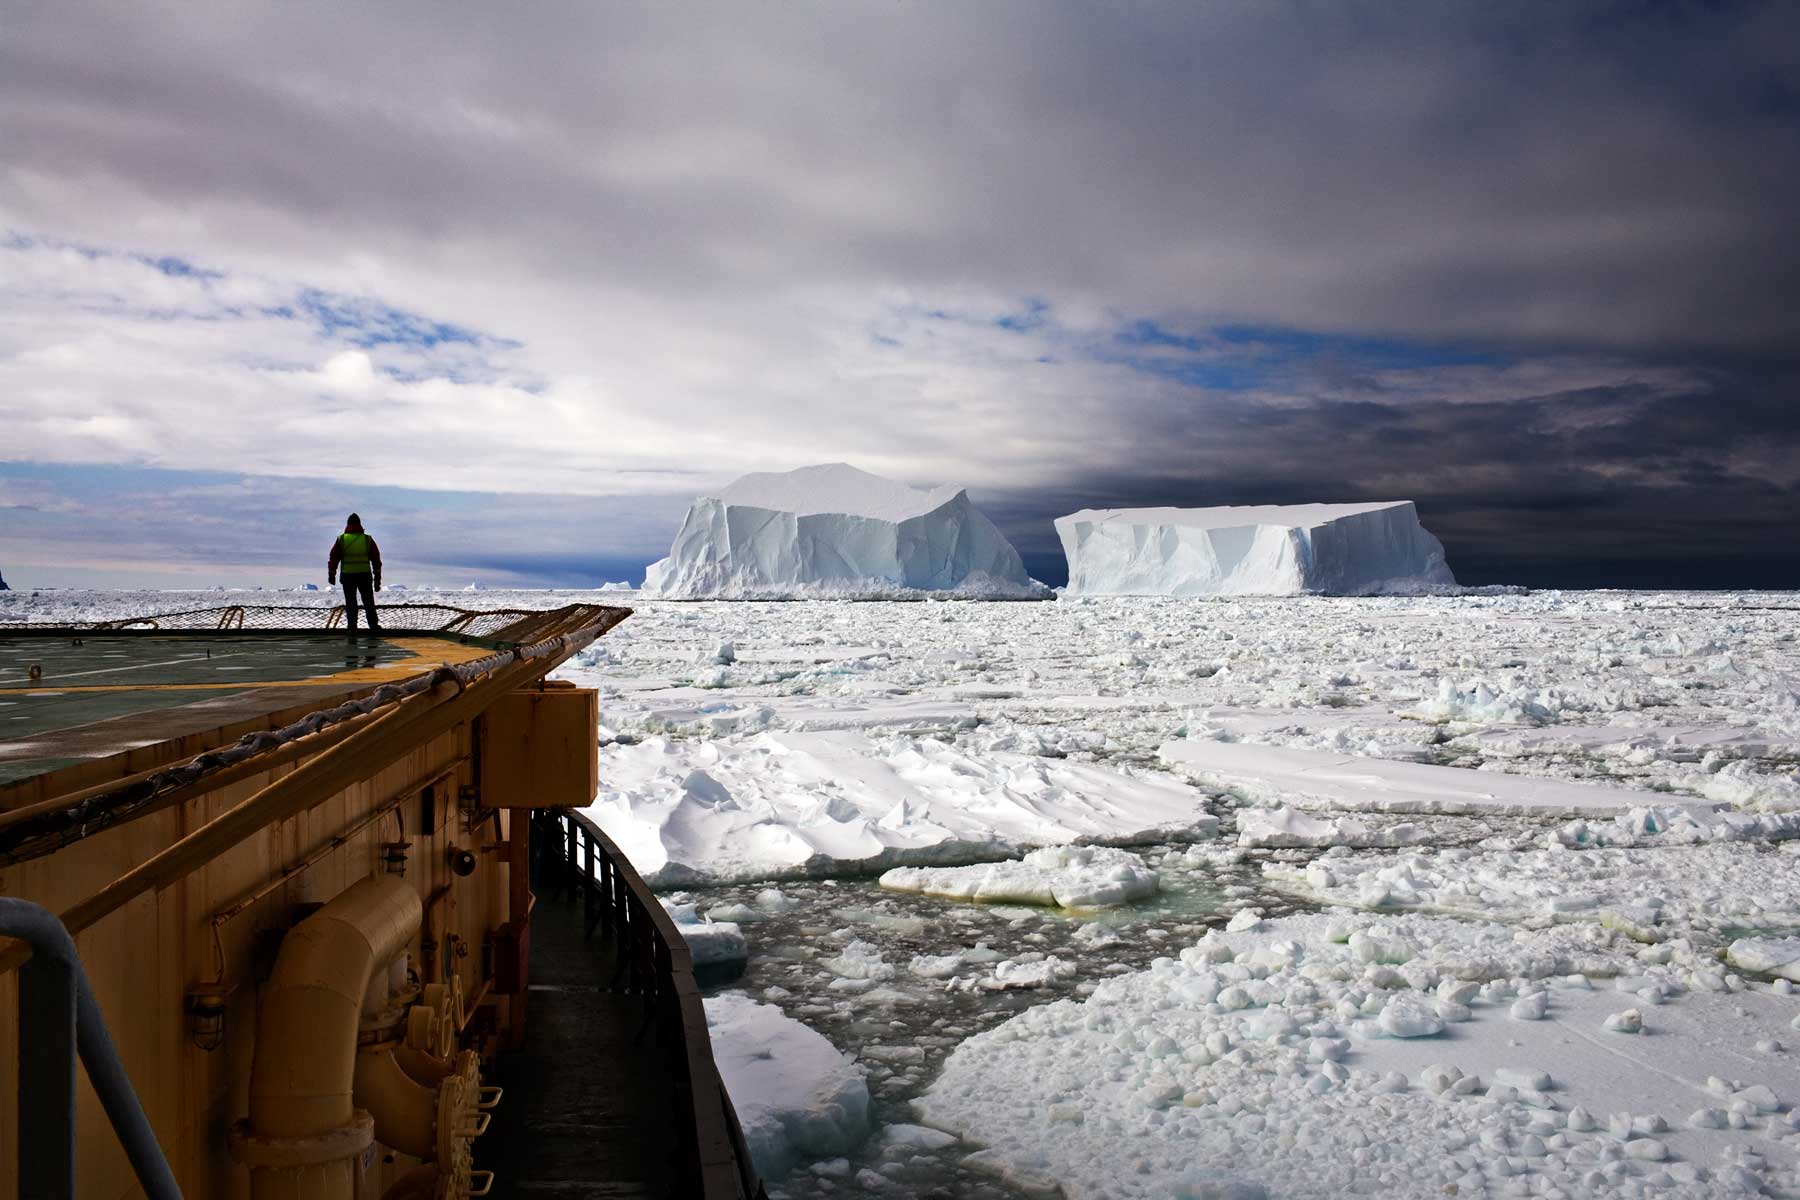 Looking at the Icebergs, Near Franklin Island, Ross Sea, Antarctica in 2006. (Camille Seaman)